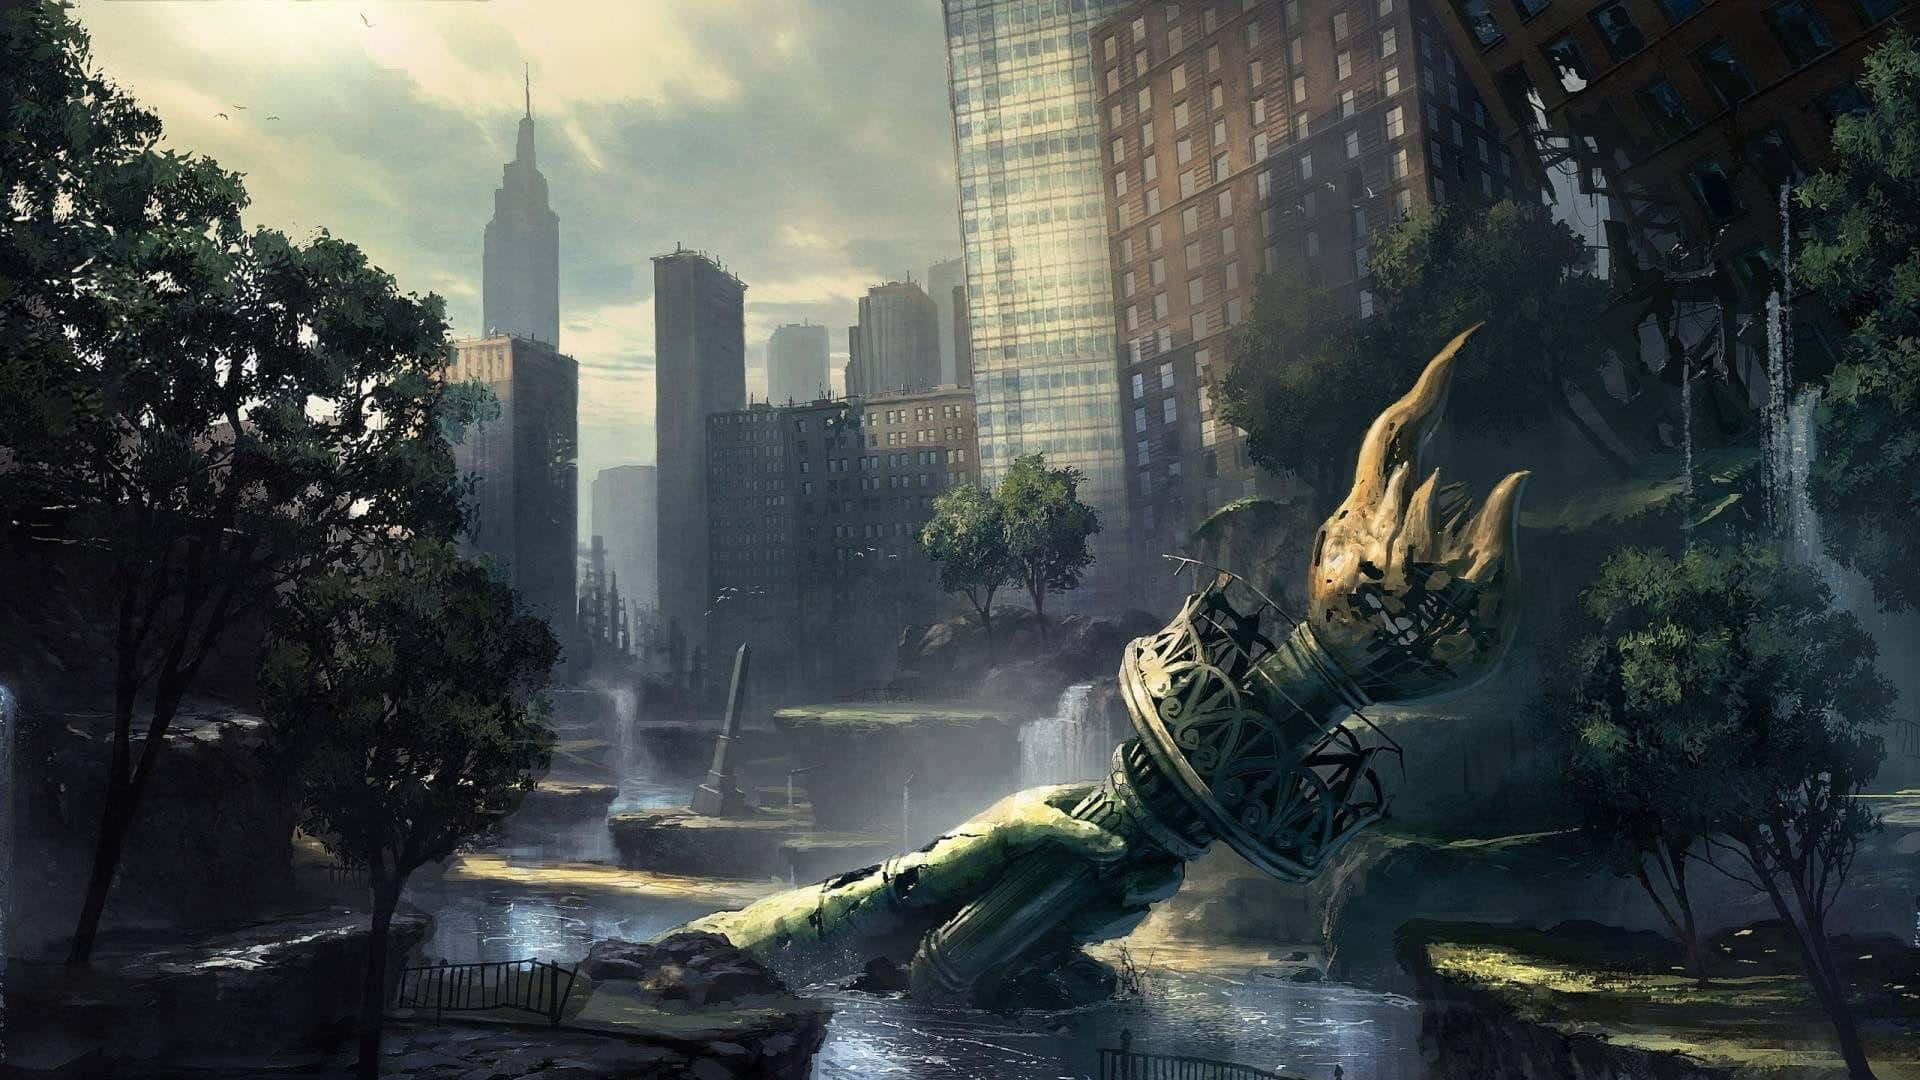 Statue Of Liberty In Destroyed City Background